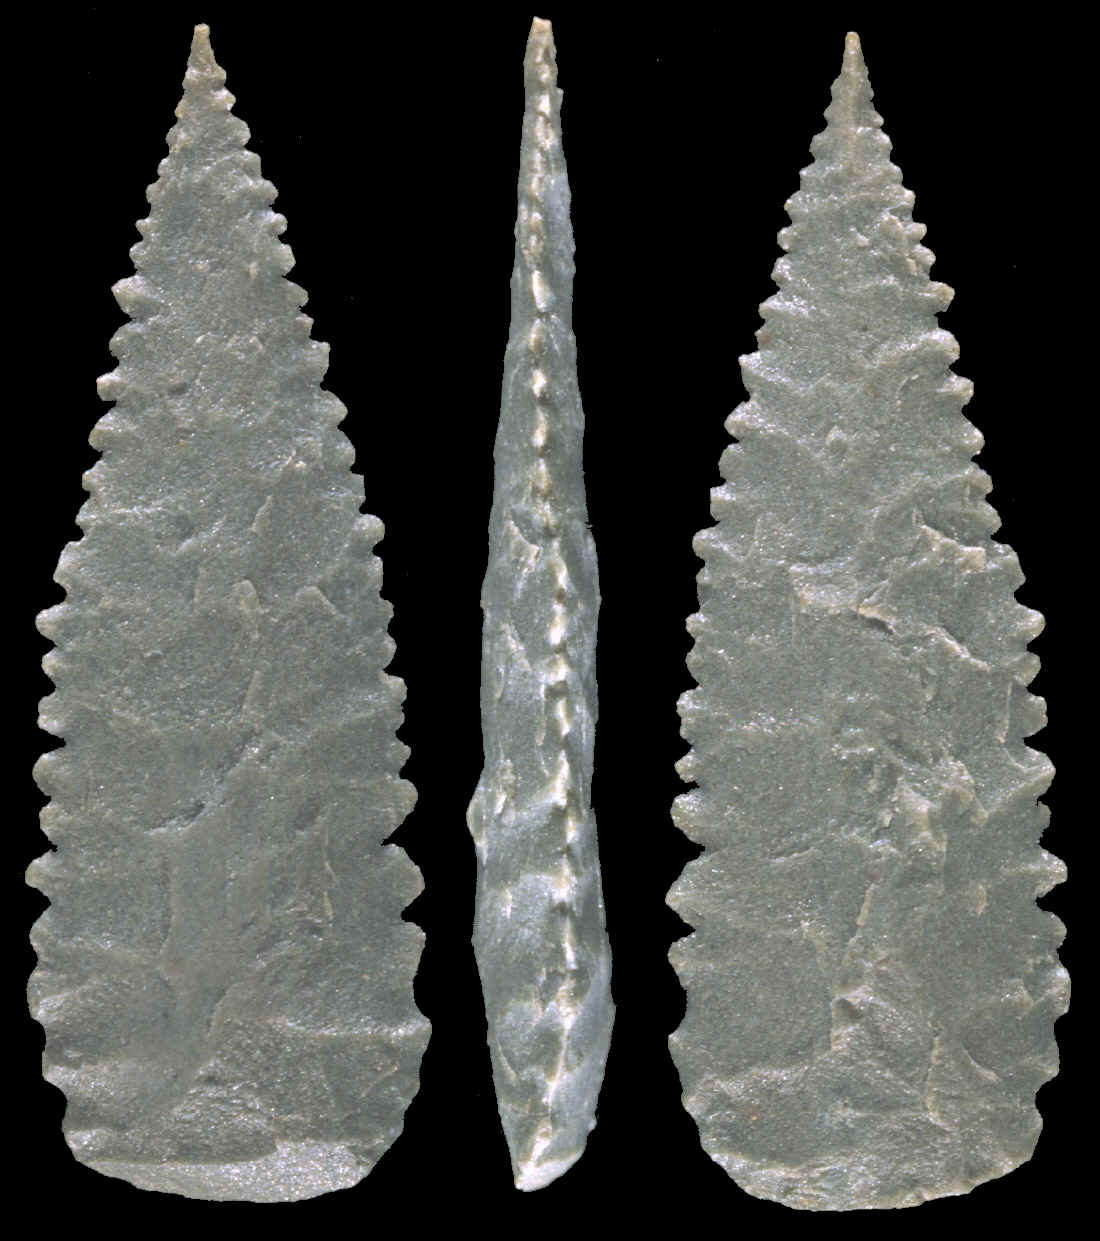 Kimberley spear point made of gray quartzite.